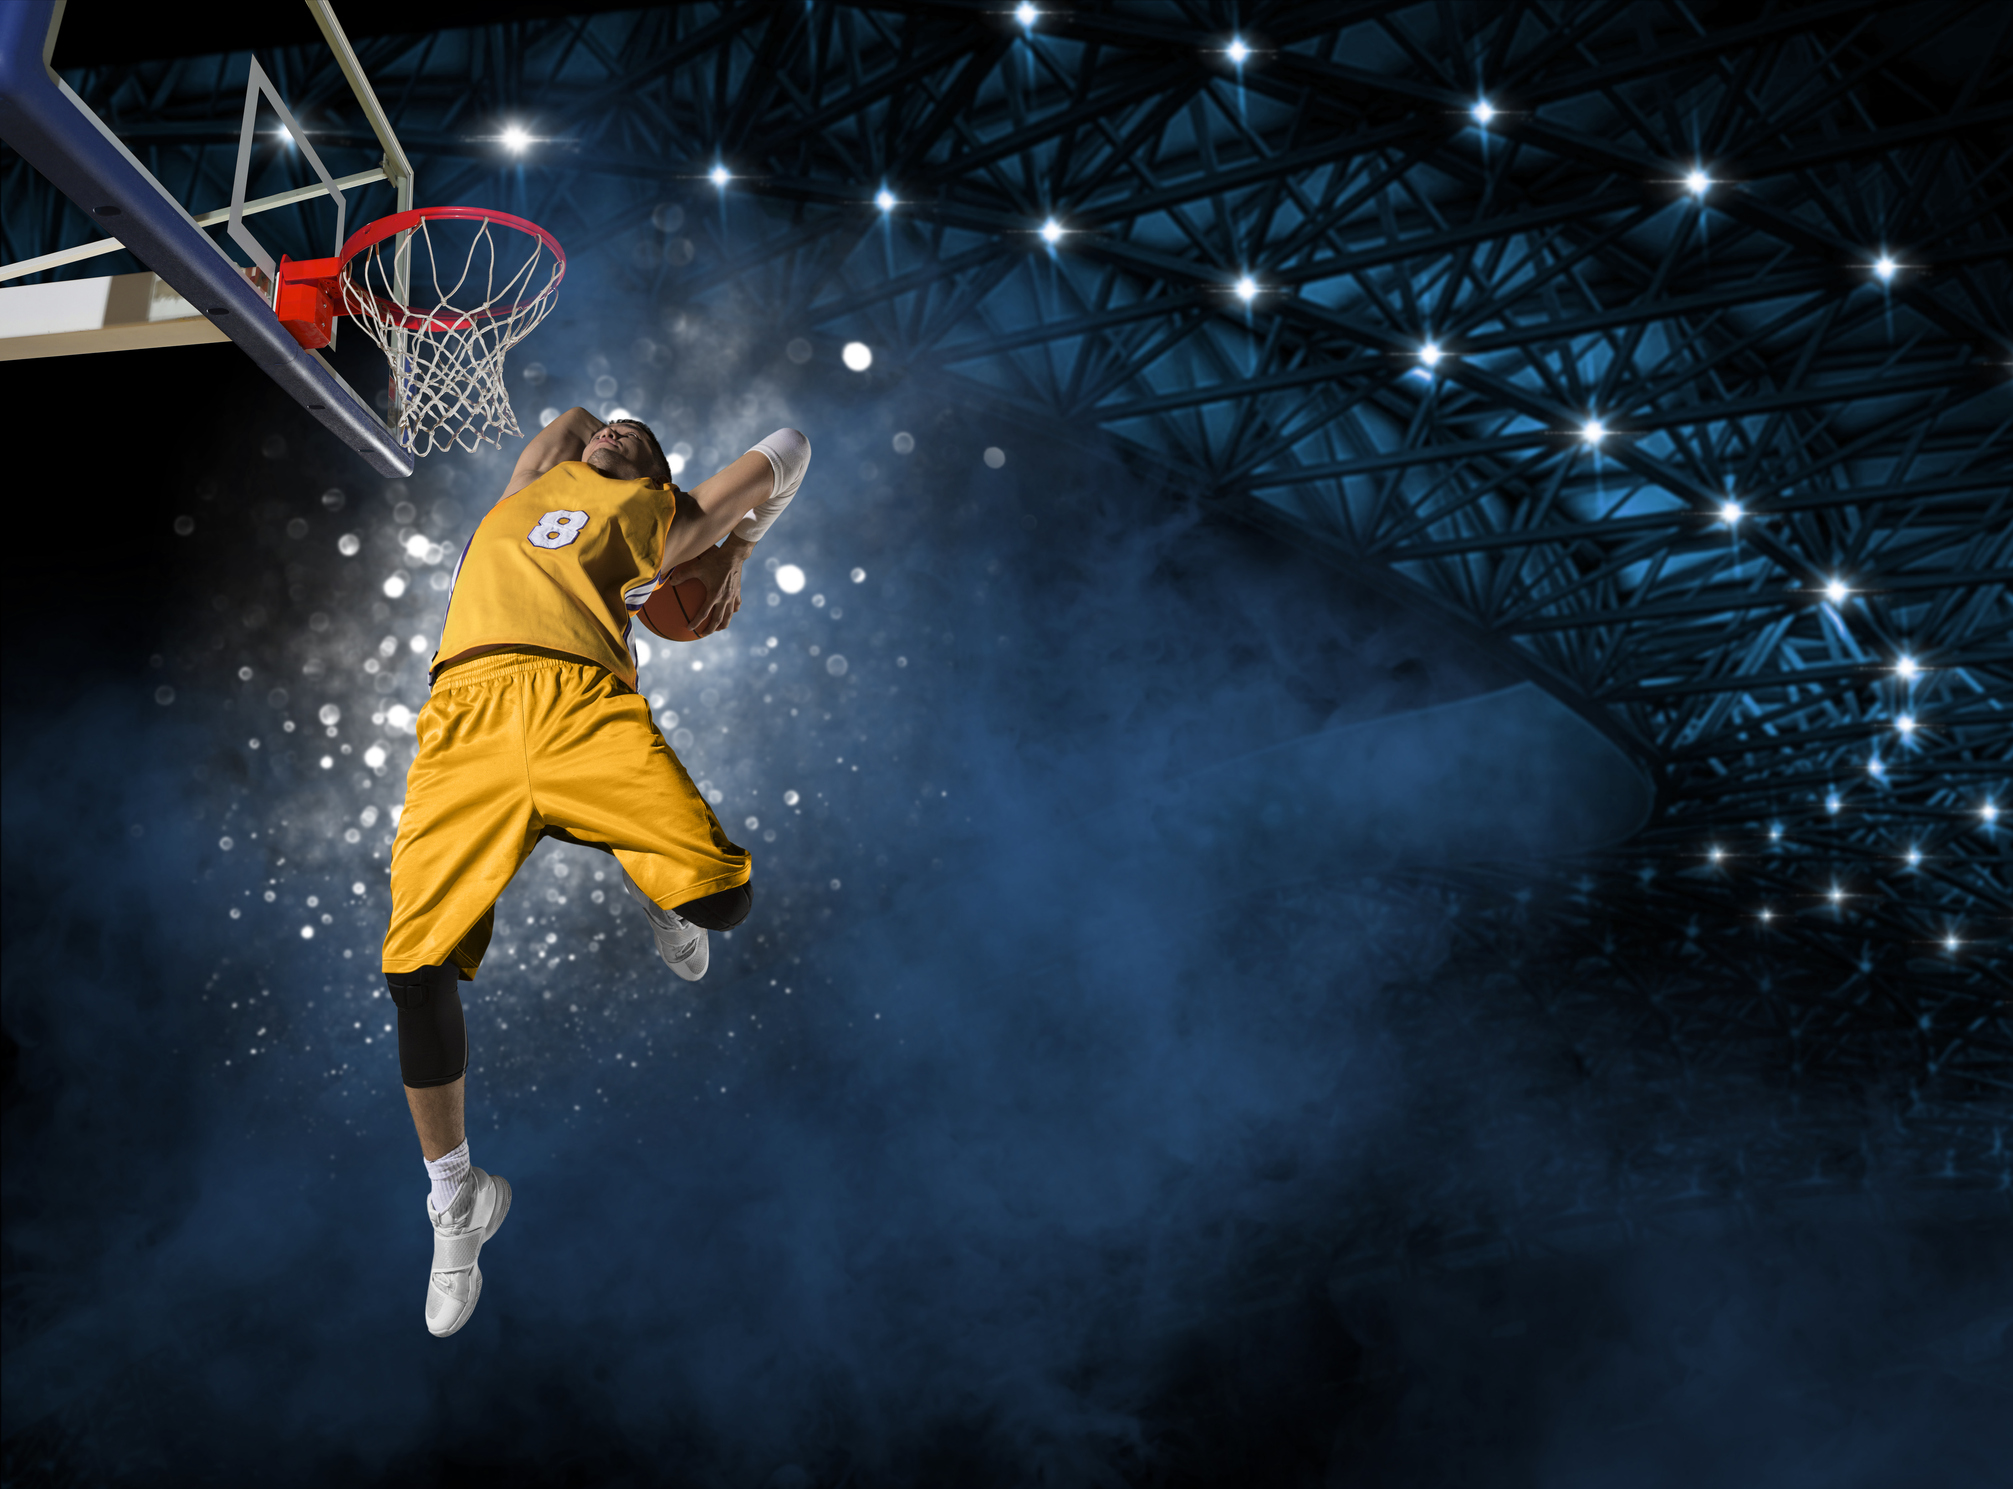 Basketball player players in action. Basketball concept on dark smoke background